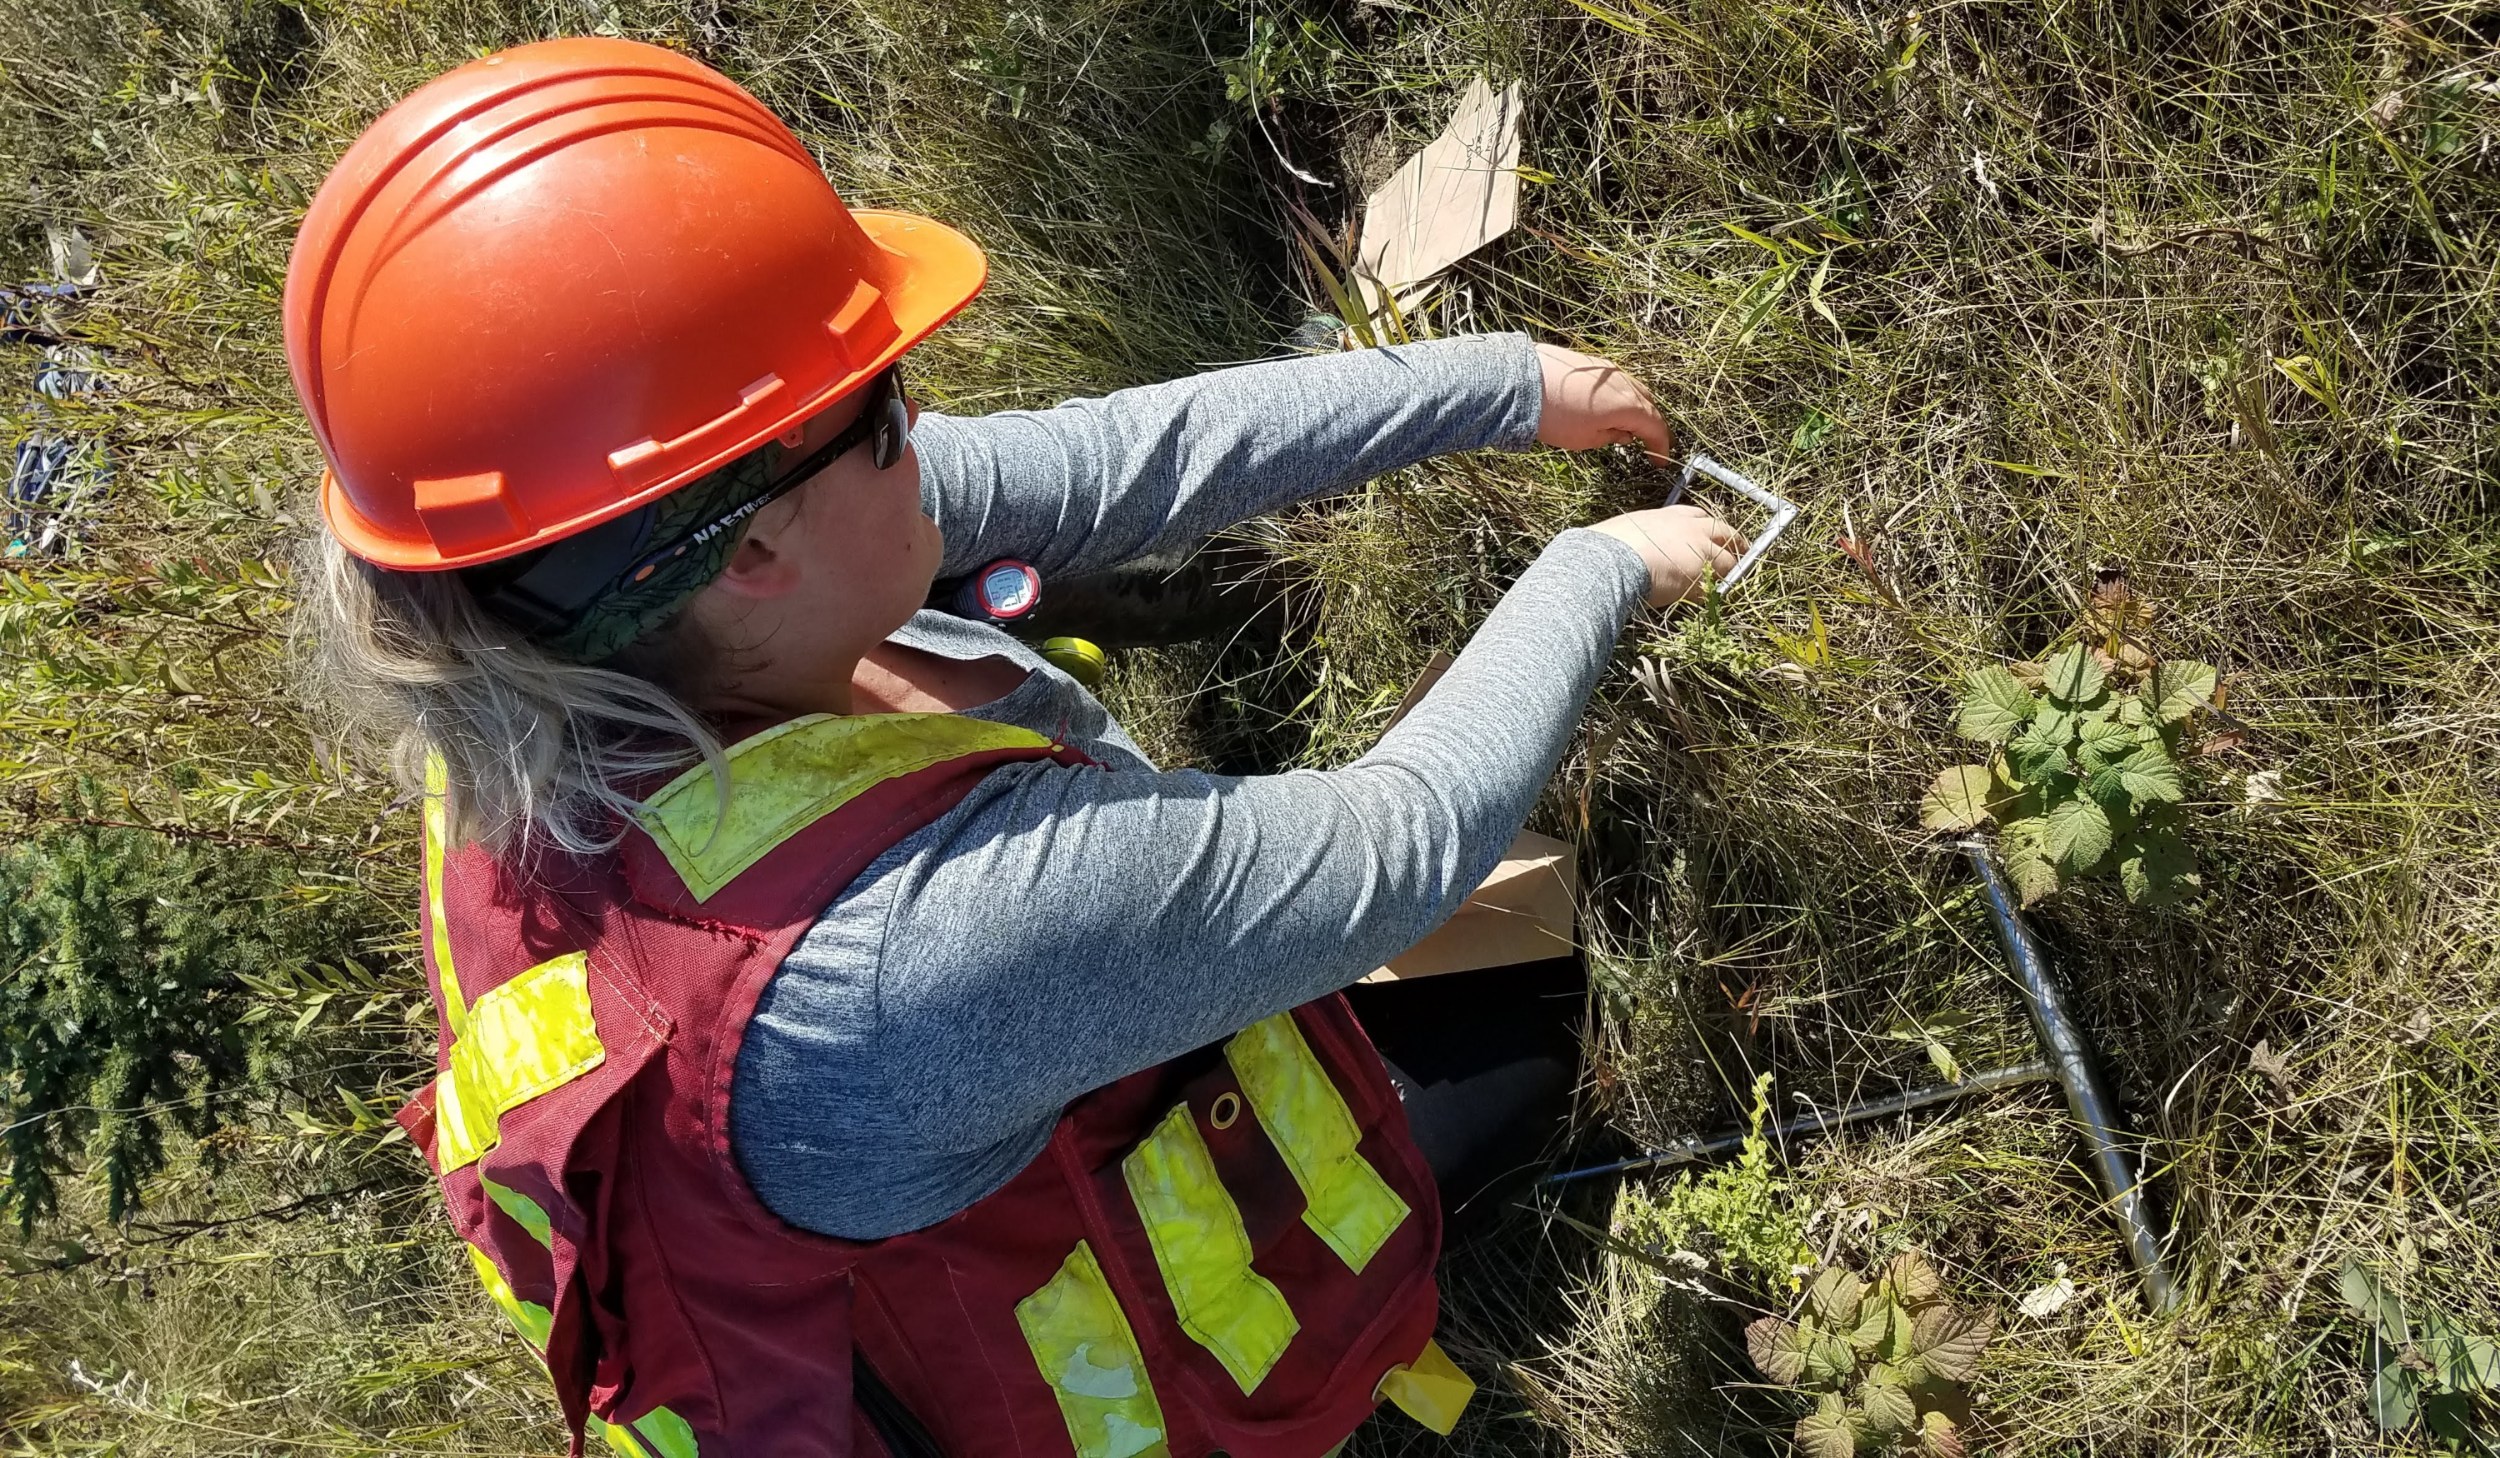 Researcher Stephanie Chute-Ibsen collects plant litter samples from a land reclamation site in September 2019. Chute-Ibsen says soil dwellers like bugs and worms could indicate how well reclamation efforts are working to restore healthy ecosystems. 